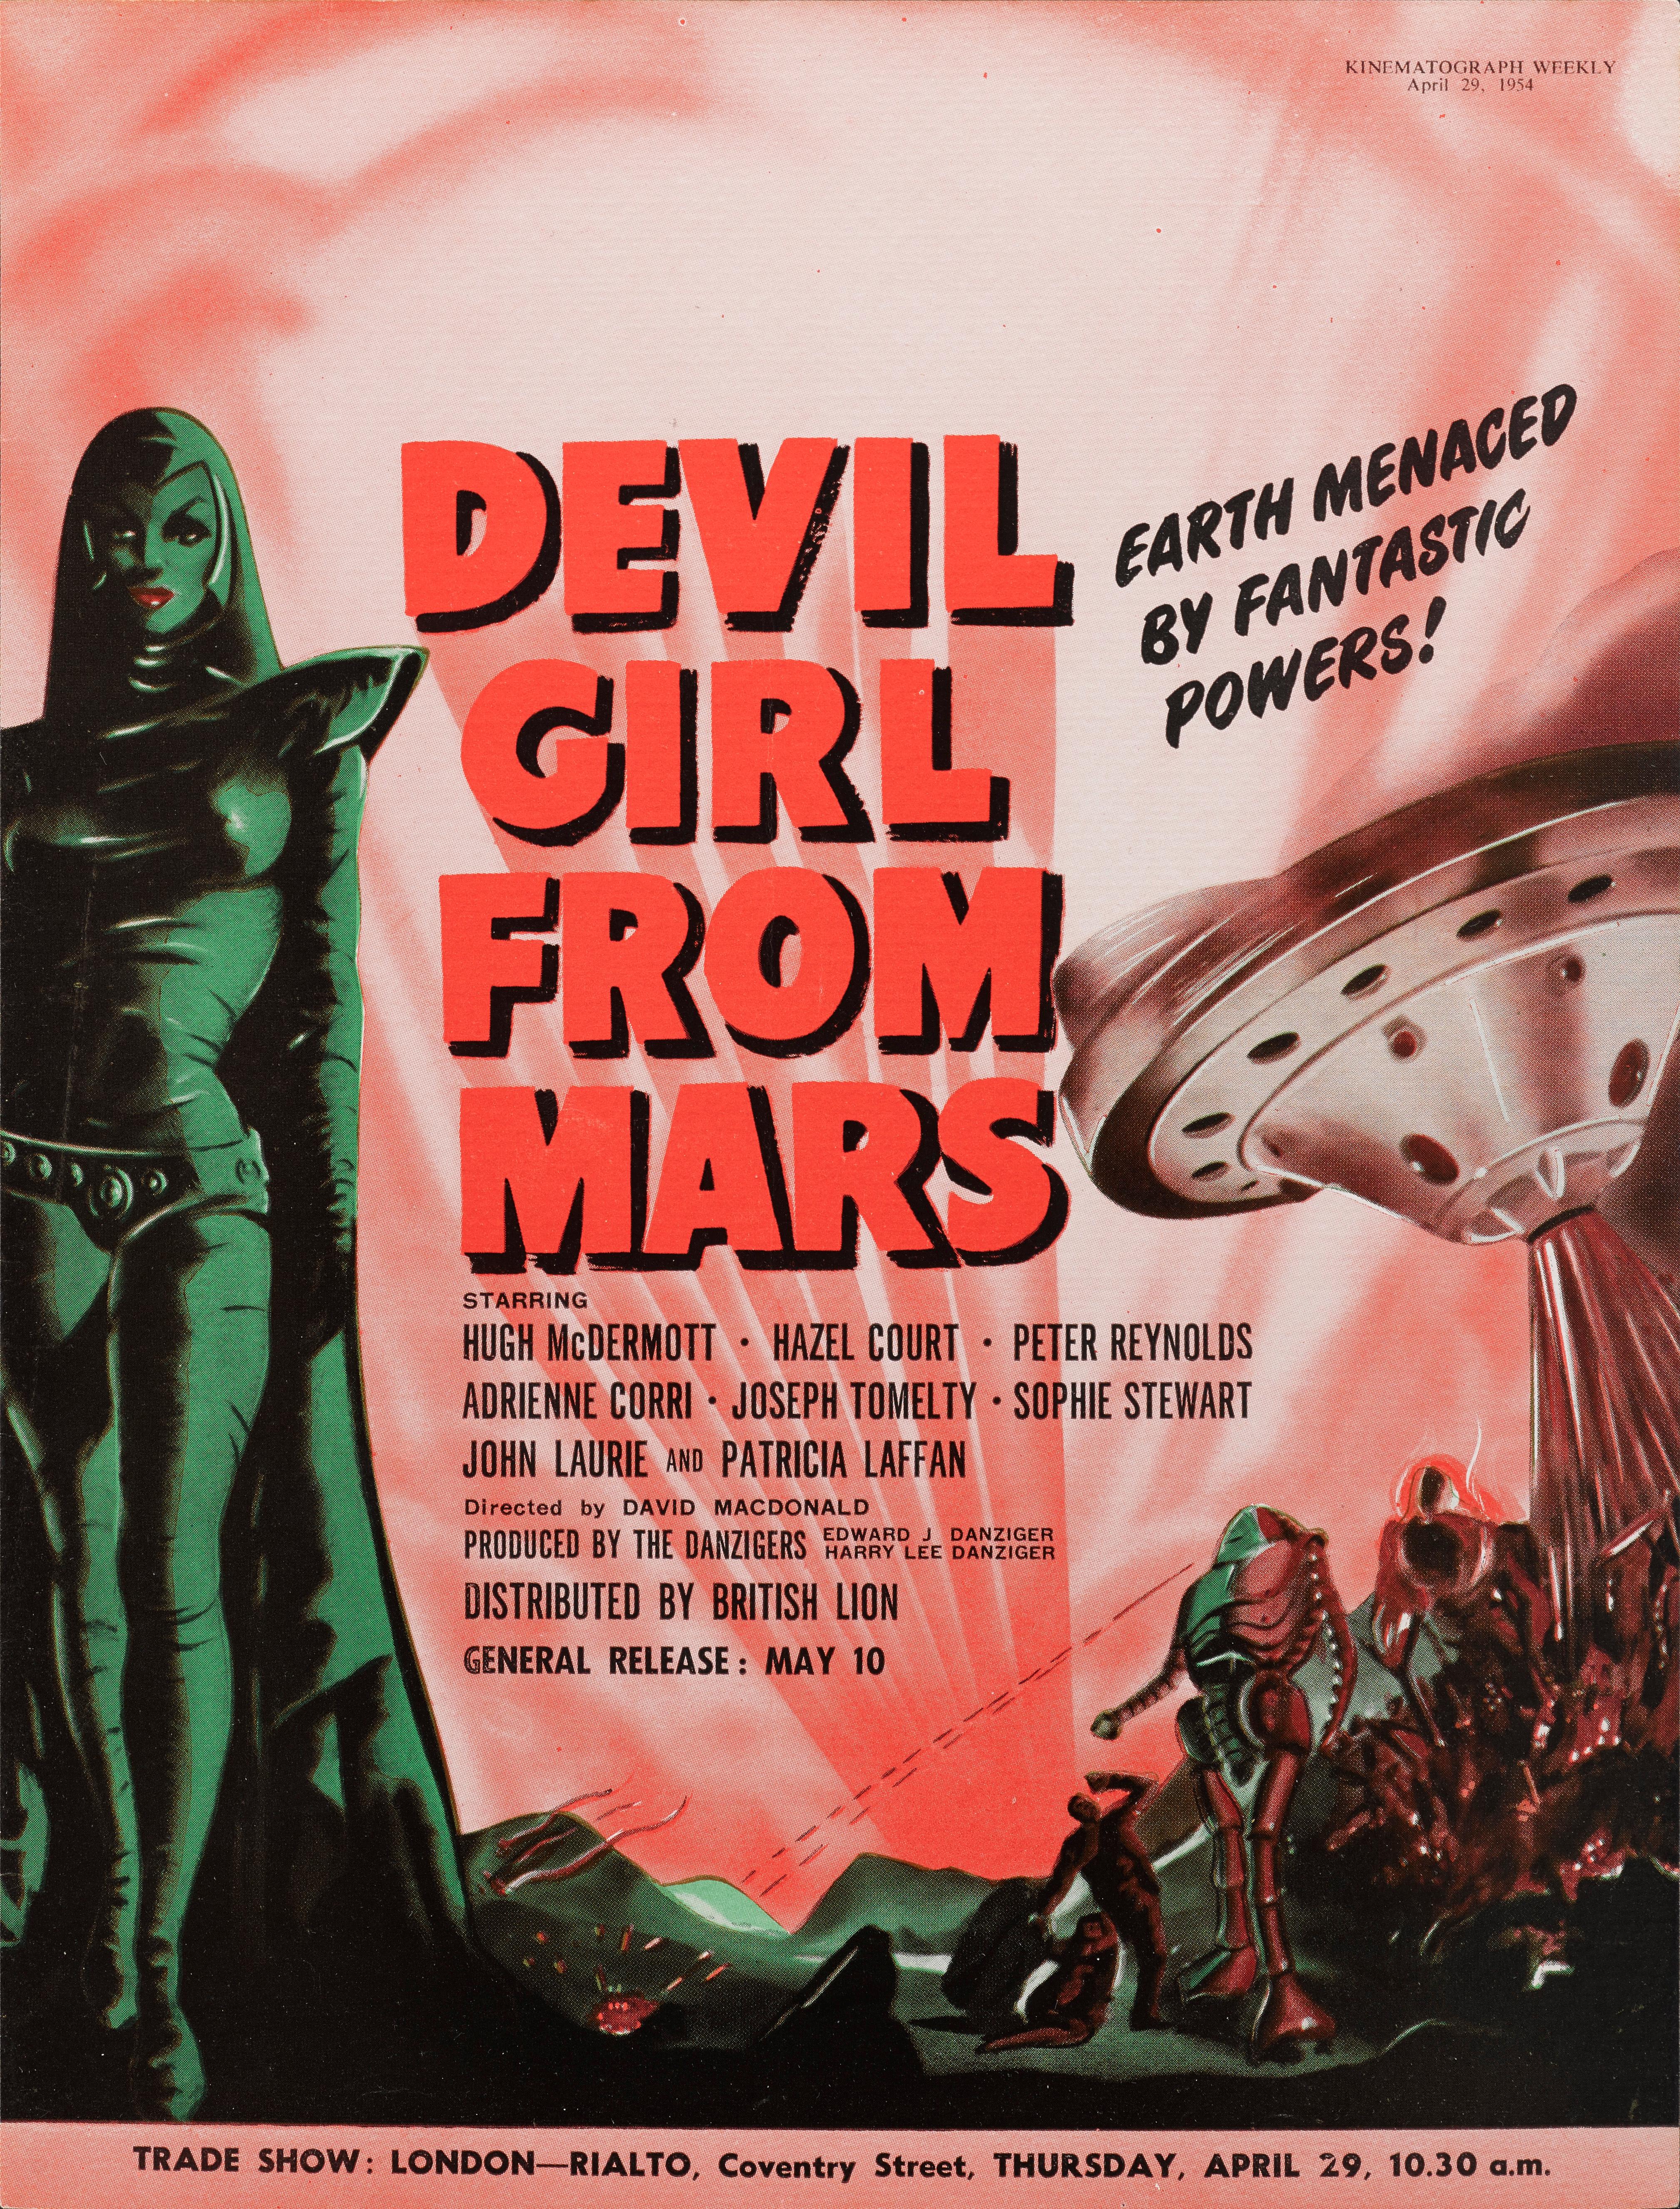 Original British trade advertisement for the 1954 science fiction film Devil Girl from Mars.
The film was directed by David MacDonald and Hugh McDermott, Hazel Court,
Peter Reynolds.
The piece is conservation paper backed and would be sent out